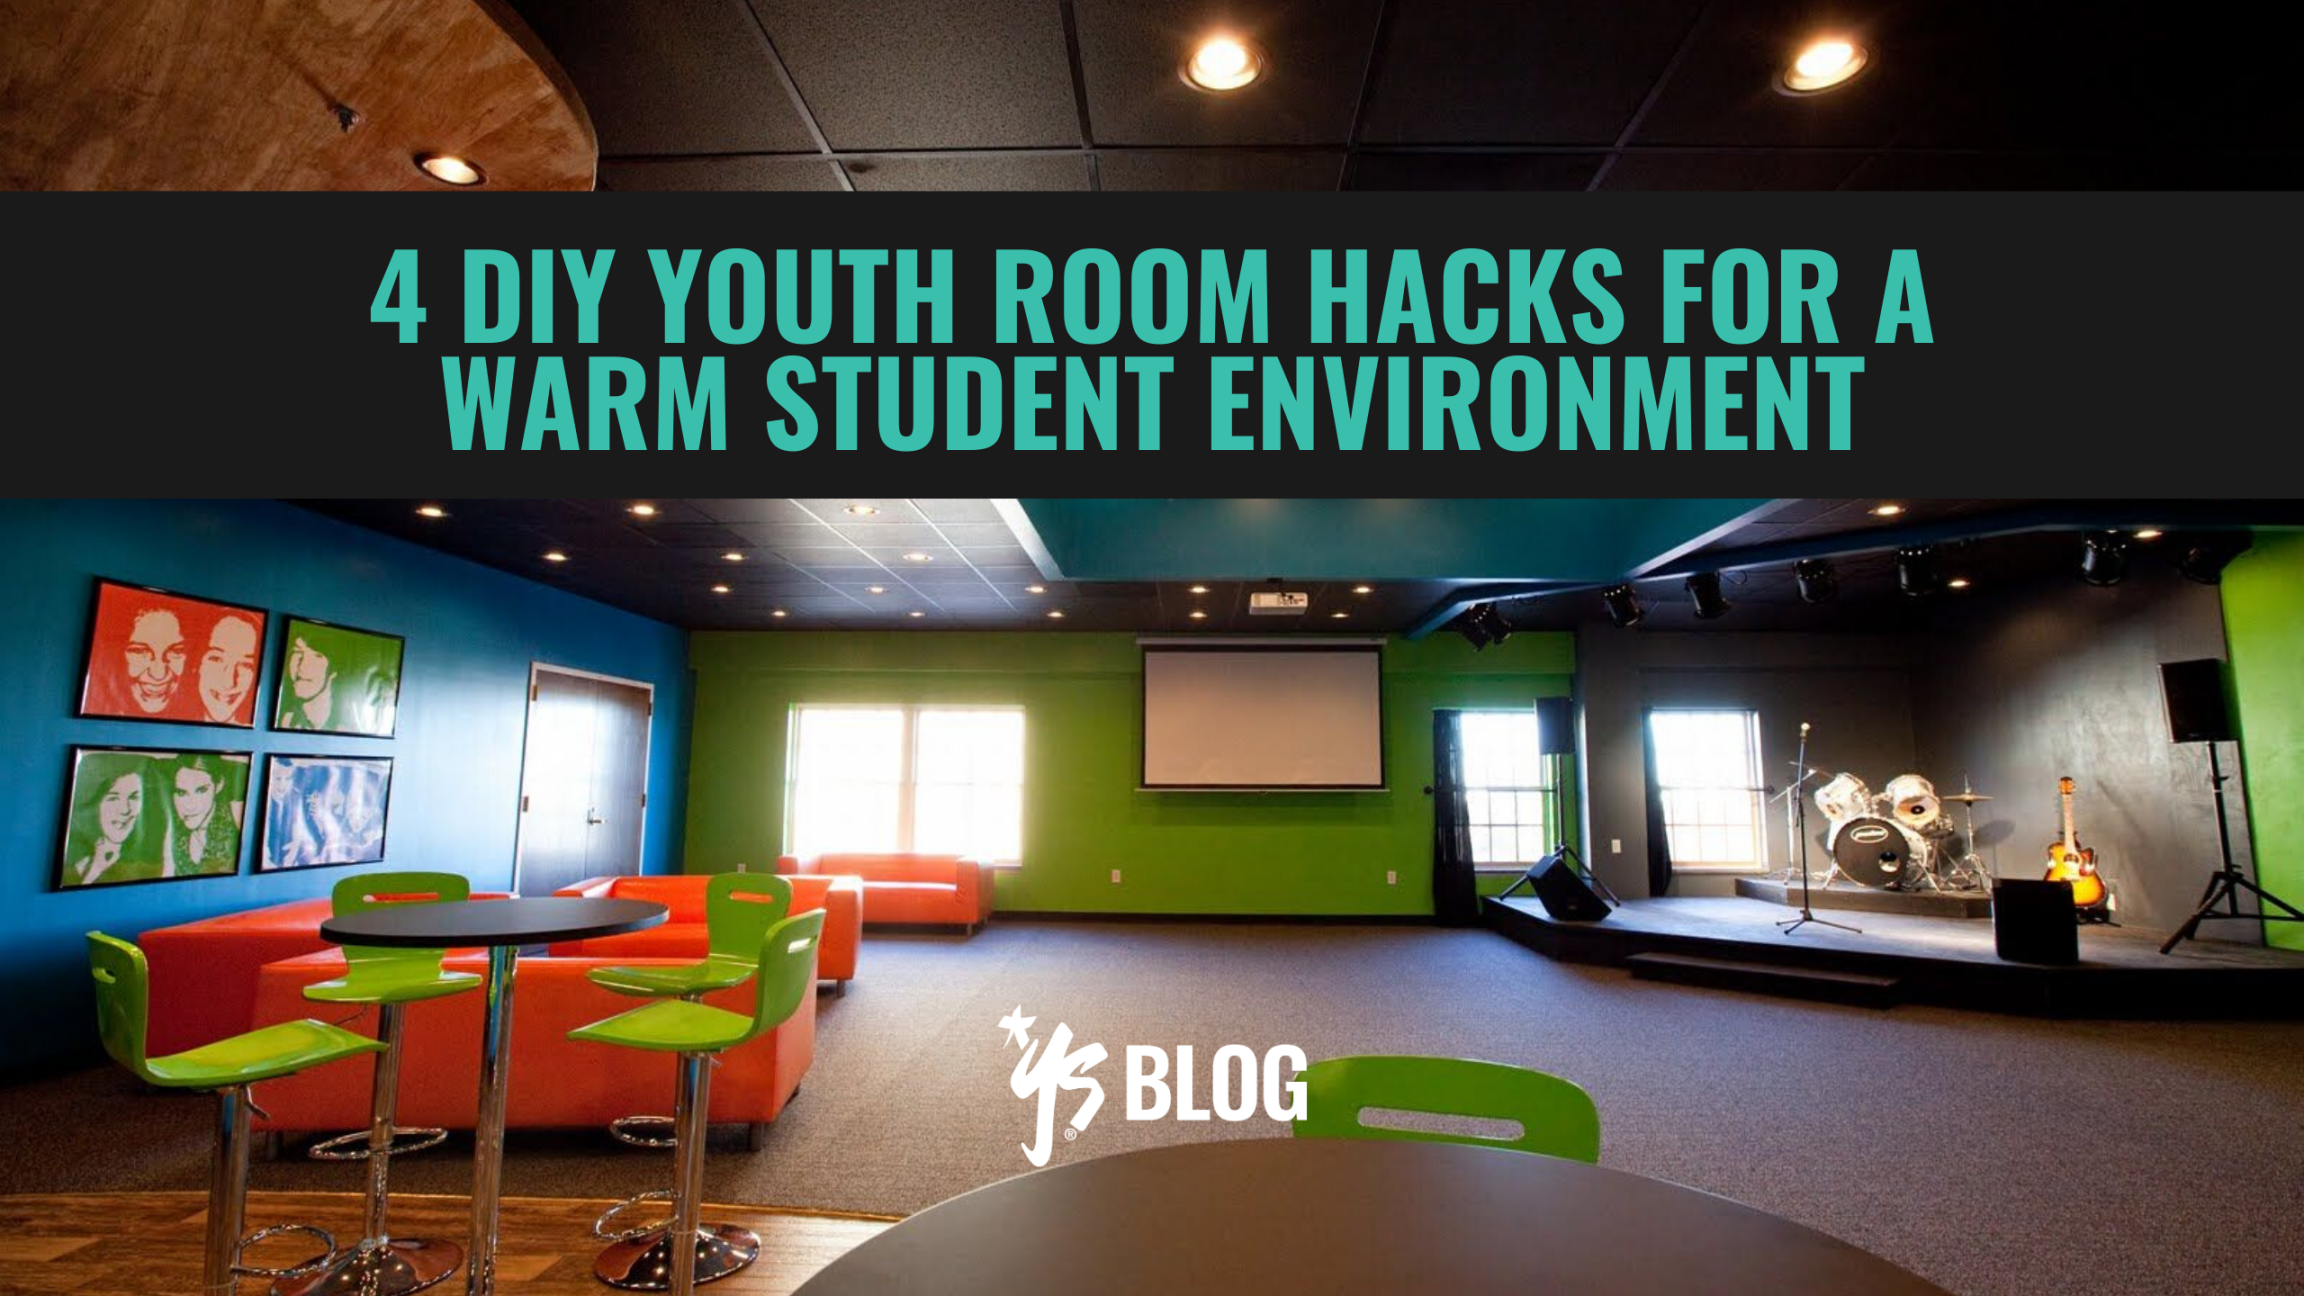 DIY Youth Room Hacks For A Warm Student Environment – YS Blog